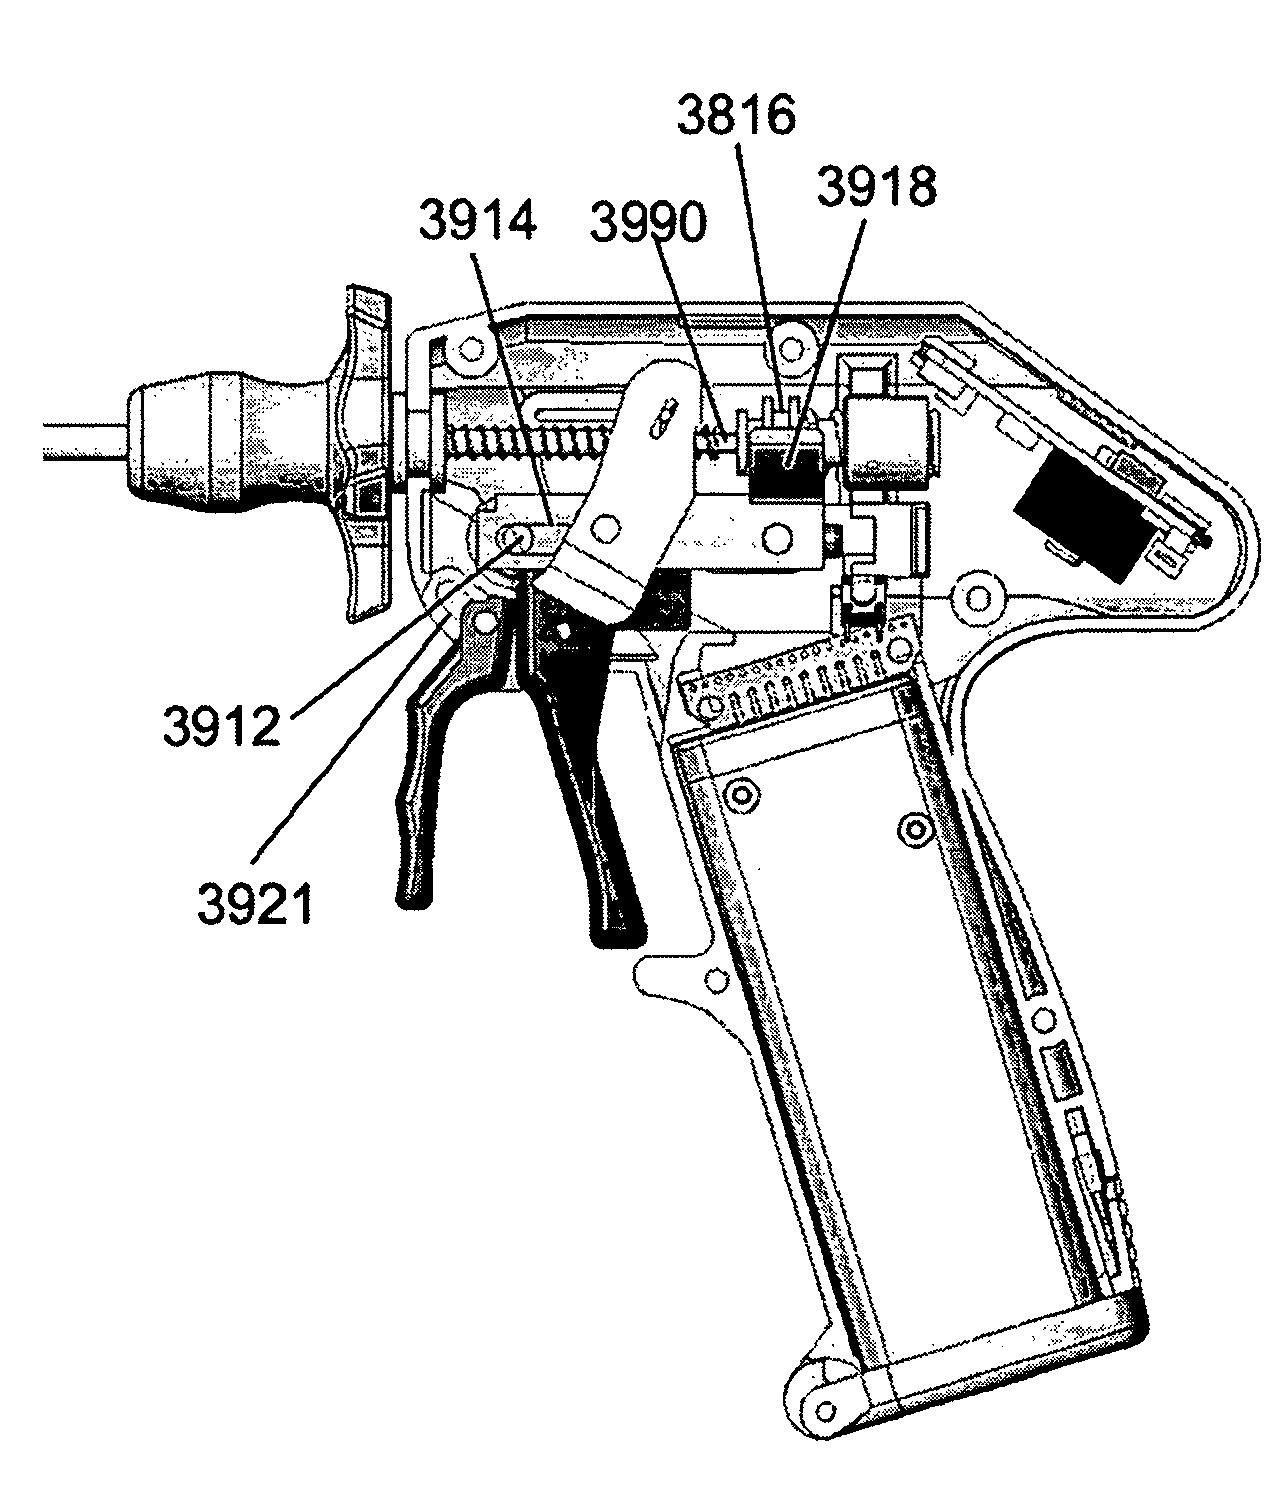 Cordless power-assisted medical cauterization and cutting device